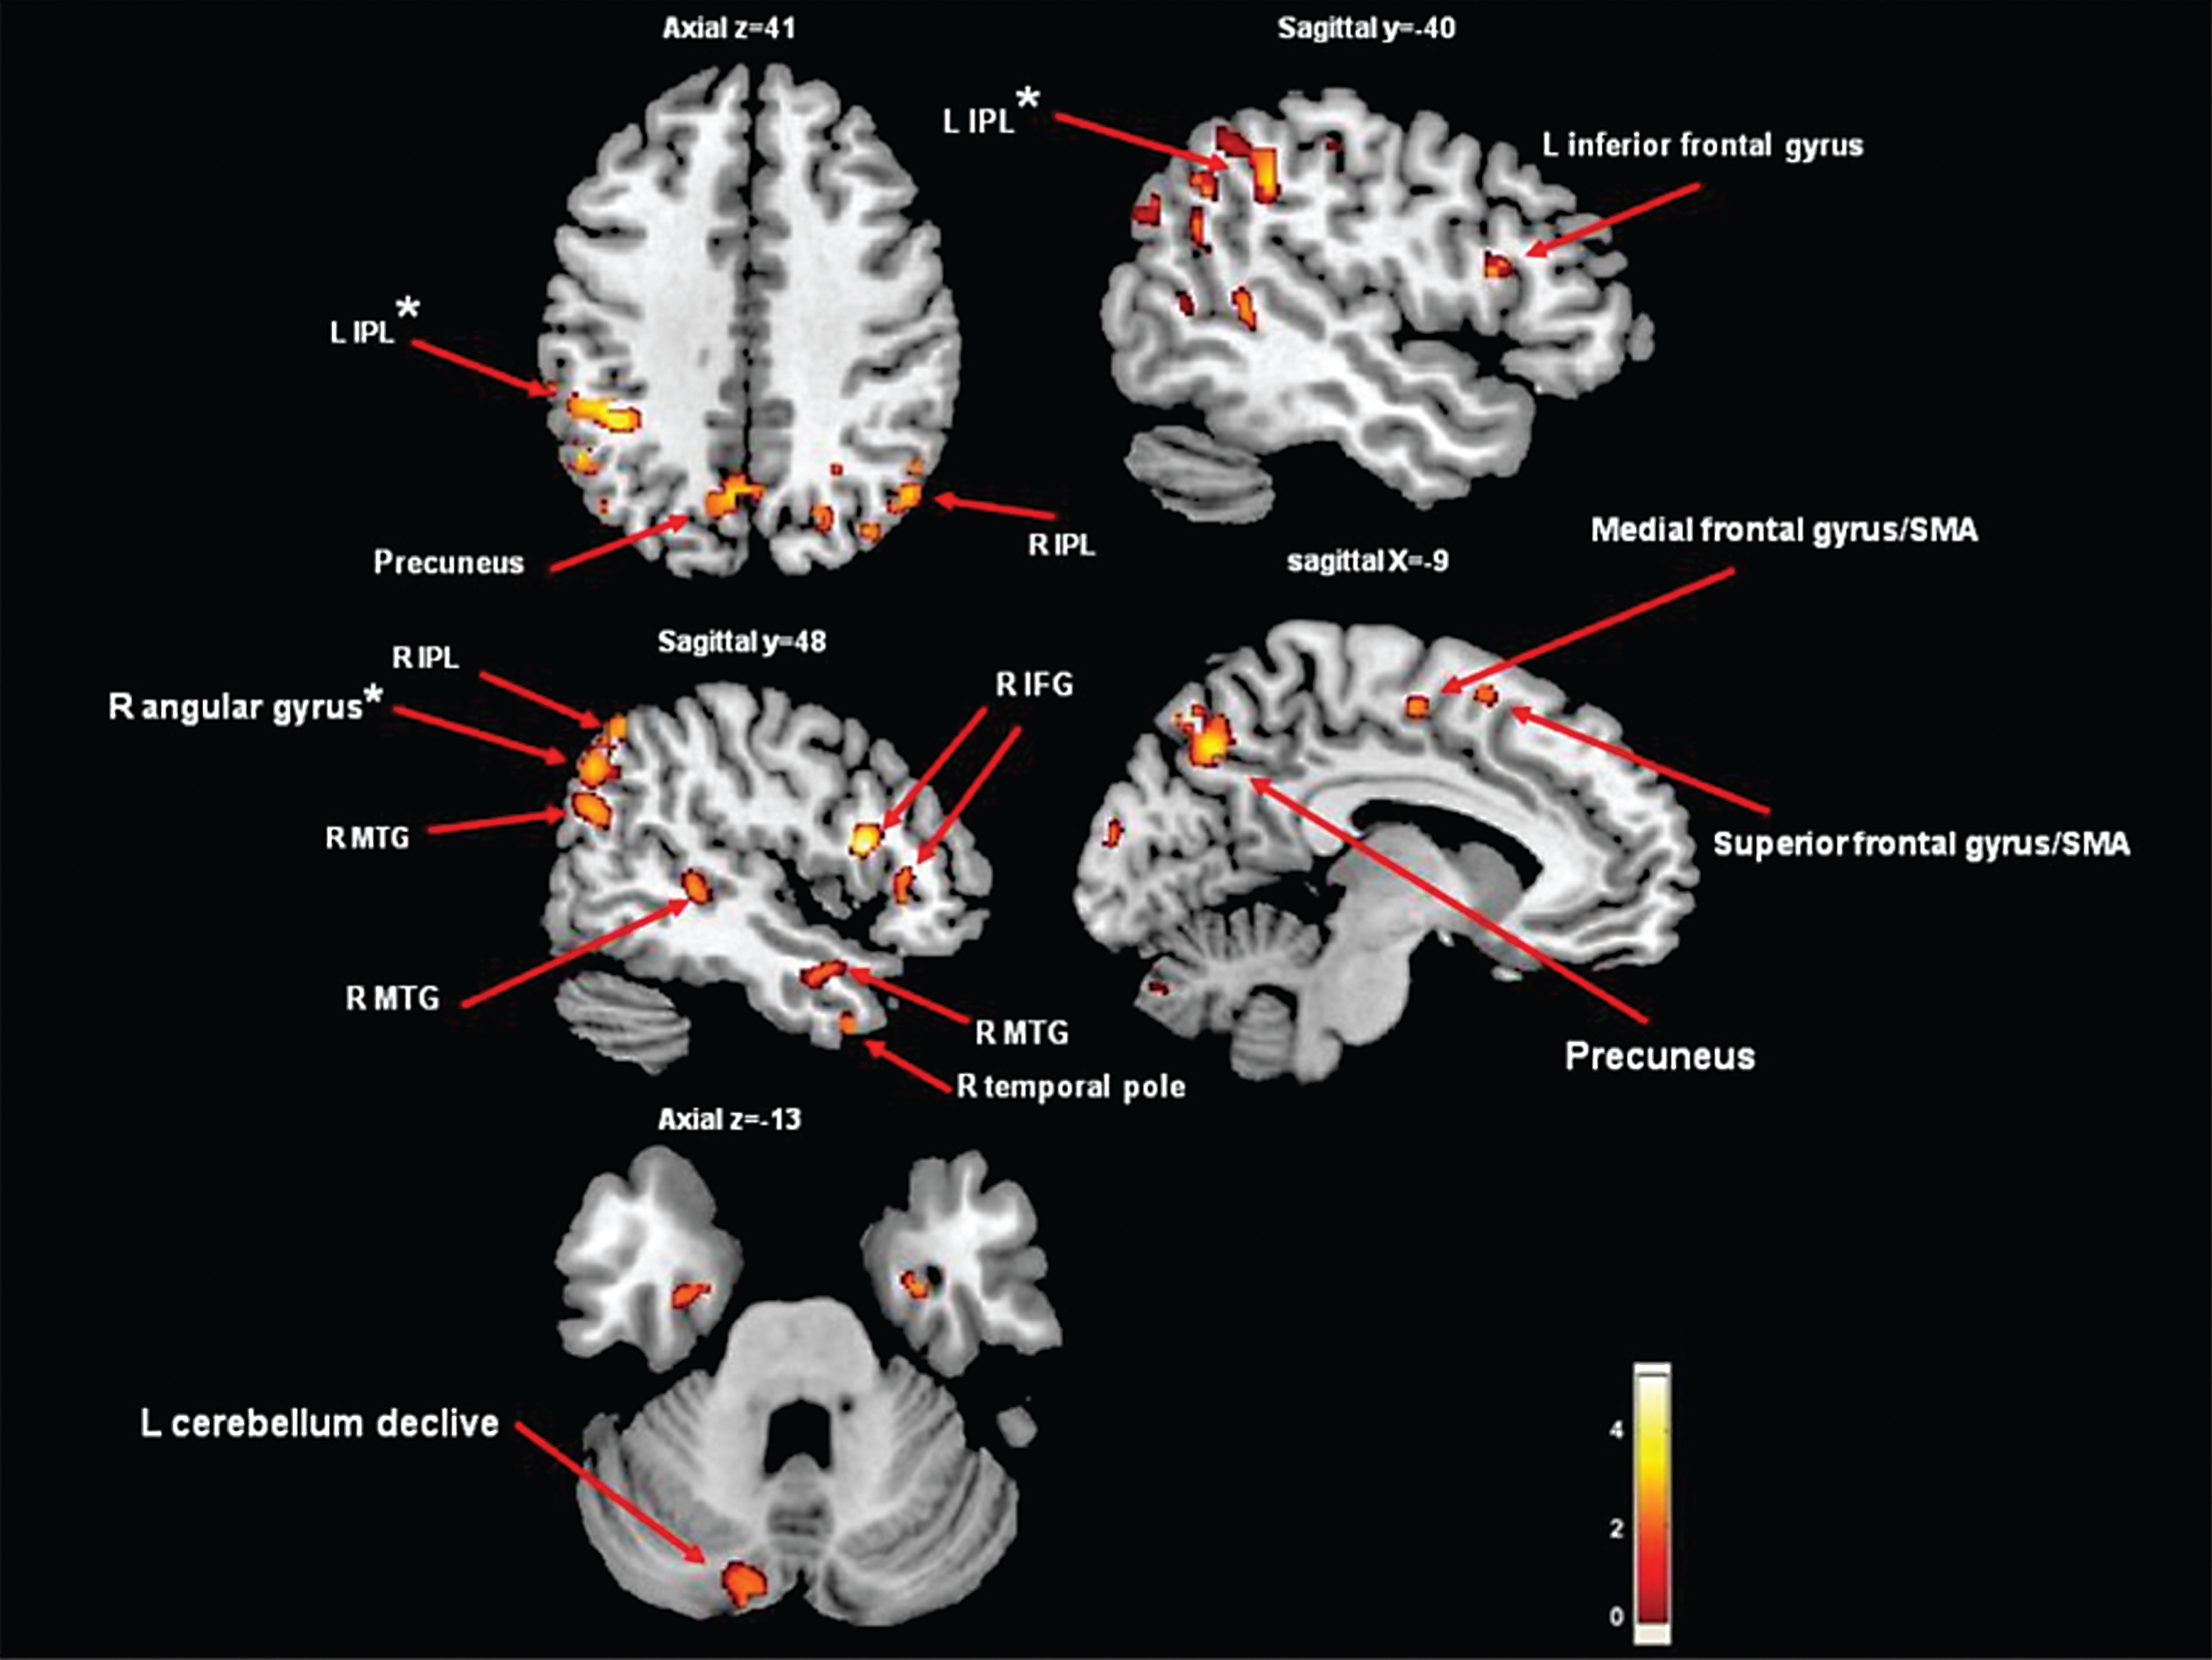 Areas of gray matter atrophy derived from a voxel-based morphometric direct comparison between PD patients with FOG (n = 22) and PD patients without FOG (n = 22). The GM maps were analyzed using analysis of variance (ANOVA) as implemented in SPM5. The model was adjusted for age and disease duration. The results are superimposed in representative sagittal and axial sections of a customized gray matter template, at a threshold of p <  0.005, uncorrected cluster size >50.  *indicates p <  0.05, cluster level corrected. Note that if we applied FWE correction on the contrasts maps, the group differences were no longer significant. Significantly lower values of GM in the freezers compared to the non-freezers were observed in the precuneus, frontal gyrus/supplementary motor area, cerebellum declive and middle temporal gyrus (p <  0.005, uncorrected). In addition, in the left IPL and the right angular gyrus, significant differences were found when correcting for multiple comparisons (p <  0.015, cluster level corrected). IFG = inferior frontal gyrus; SMA = supplementary motor area; IPL = inferior parietal lobe; MTG = middle temporal gyrus.